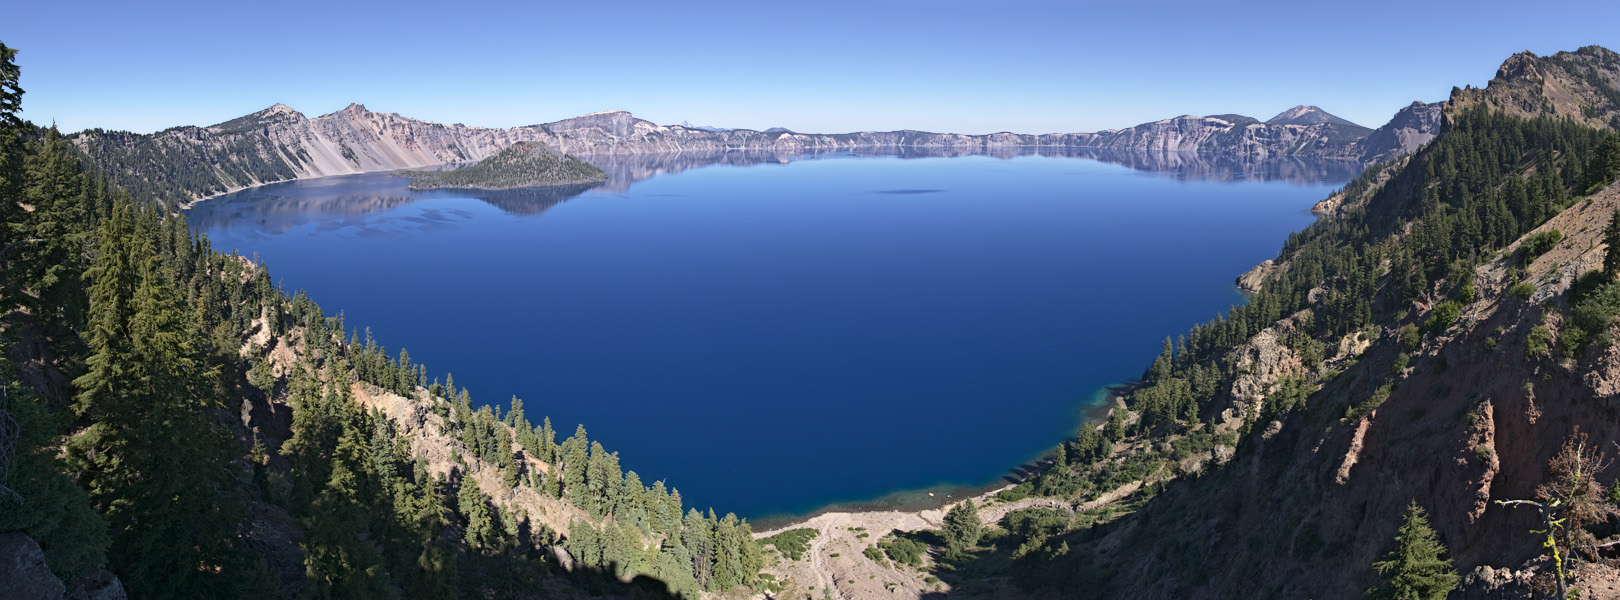 Crater Lake from Rim Village